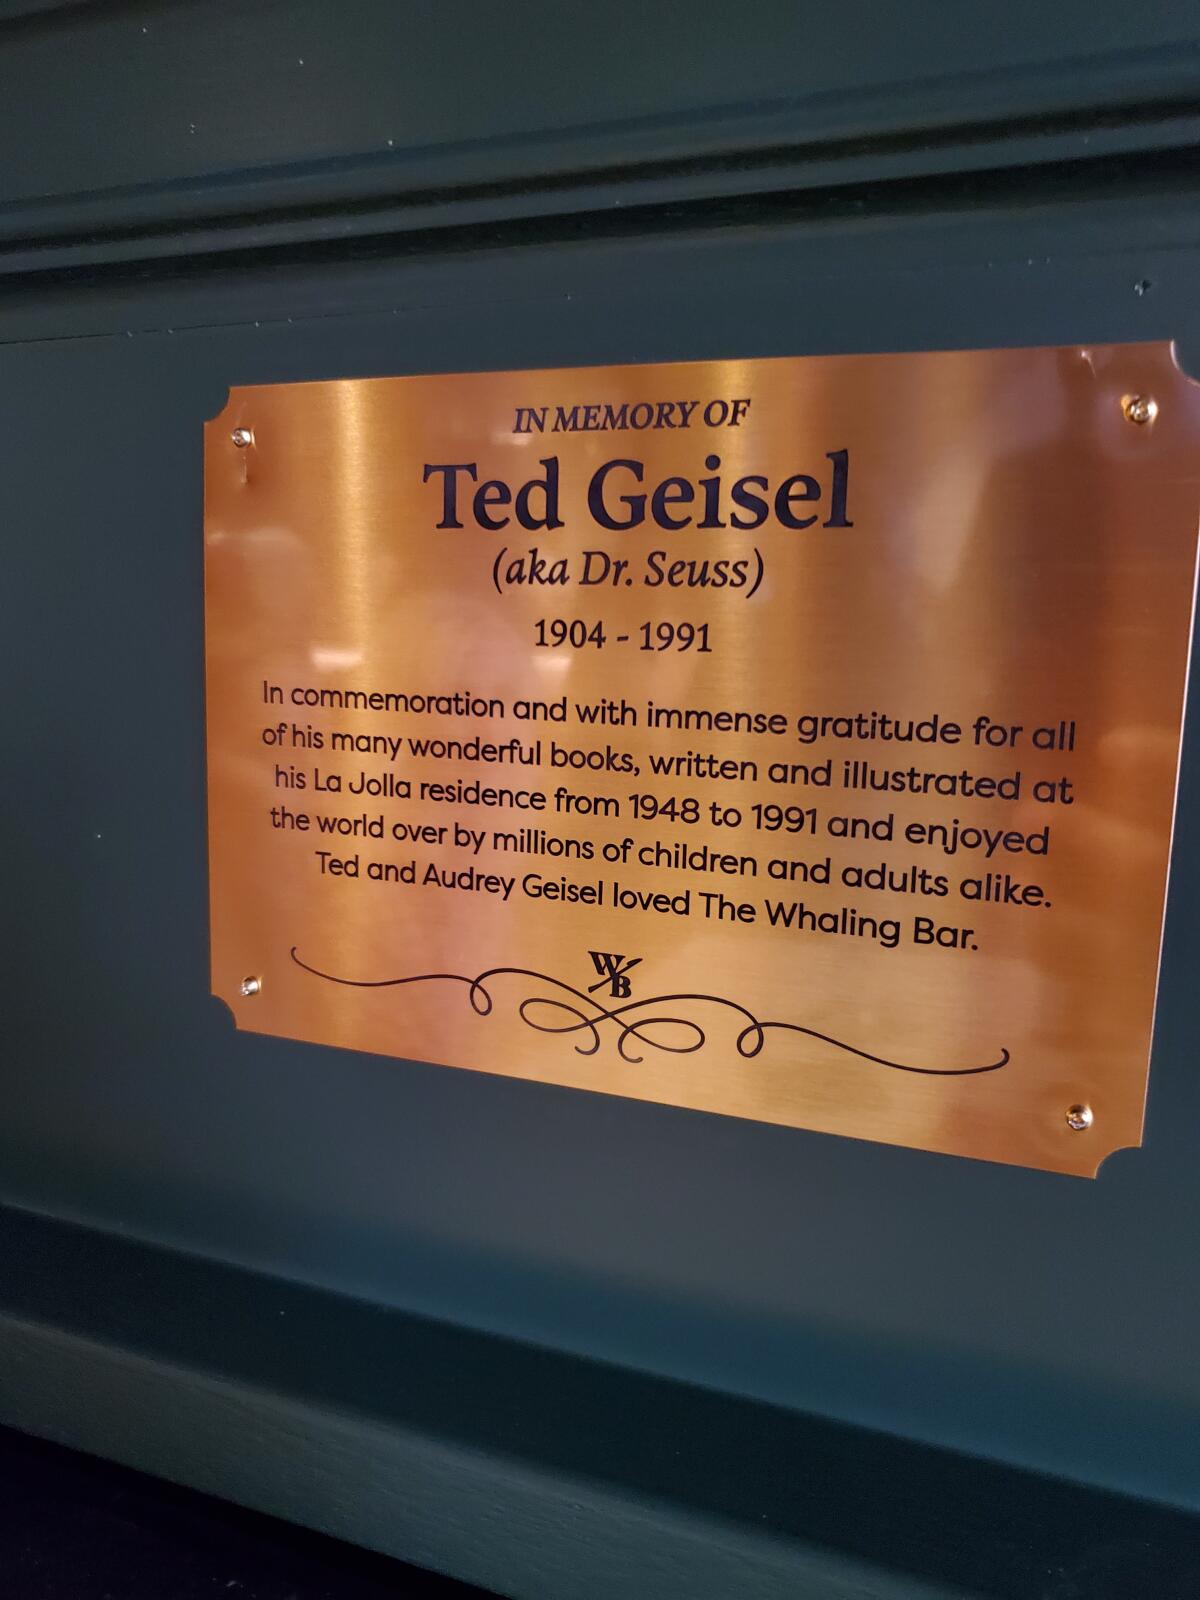 A new plaque honors Theodor "Ted" Geisel (Dr. Seuss) at The Whaling Bar.